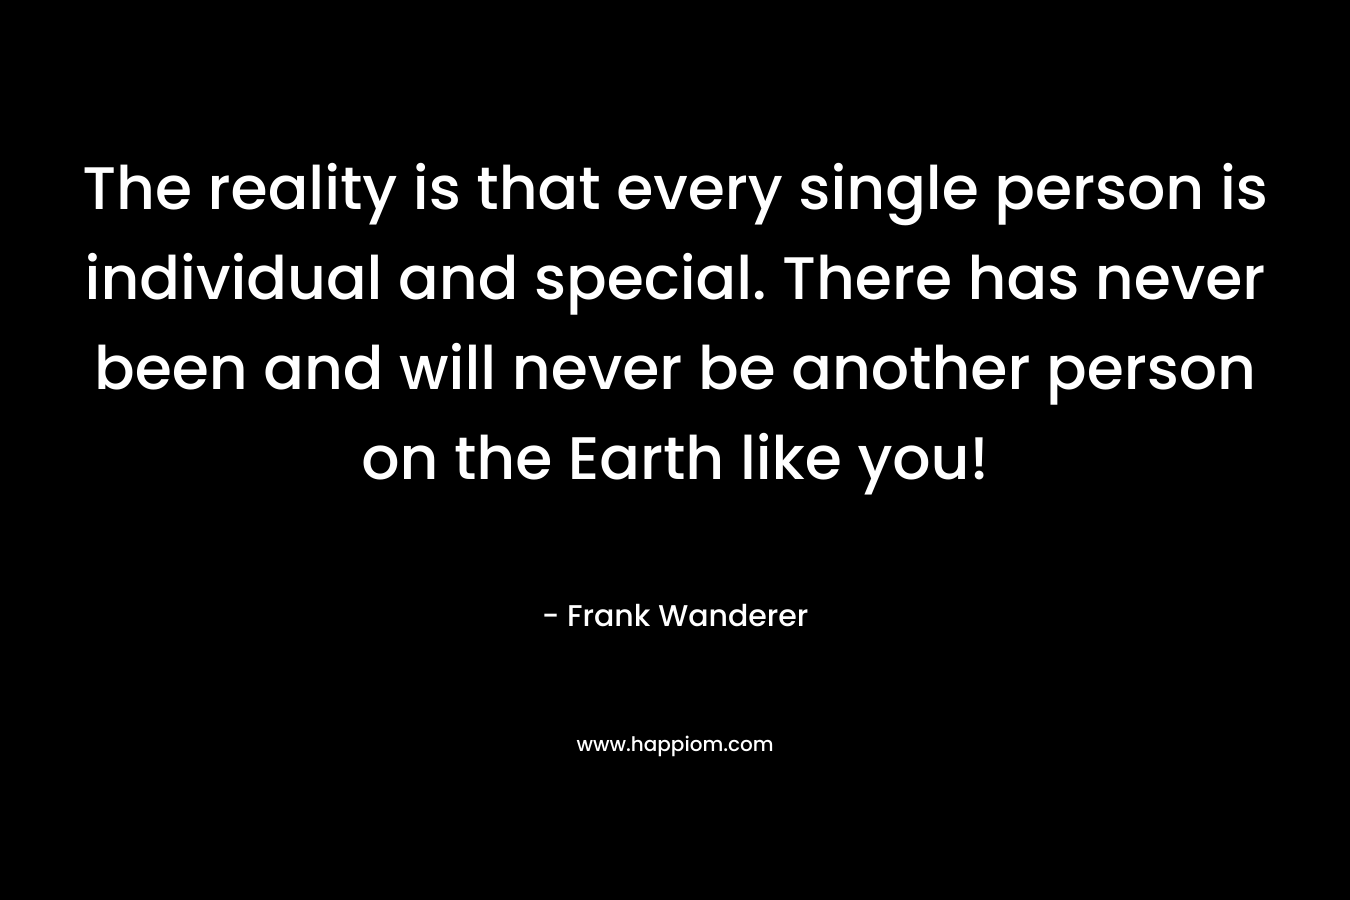 The reality is that every single person is individual and special. There has never been and will never be another person on the Earth like you!